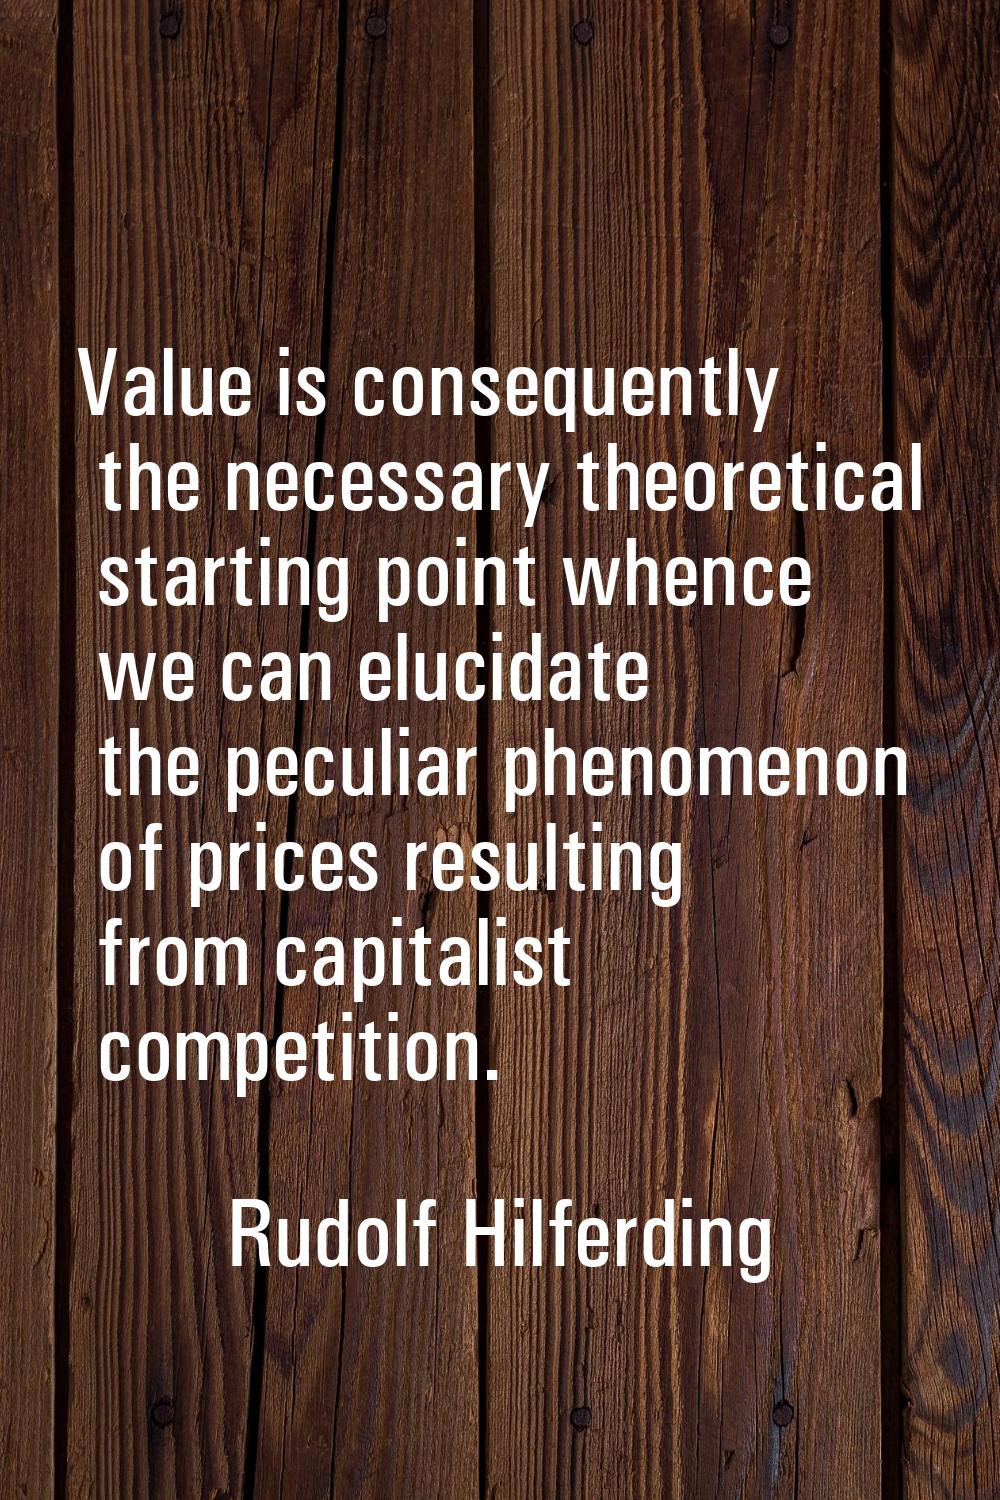 Value is consequently the necessary theoretical starting point whence we can elucidate the peculiar